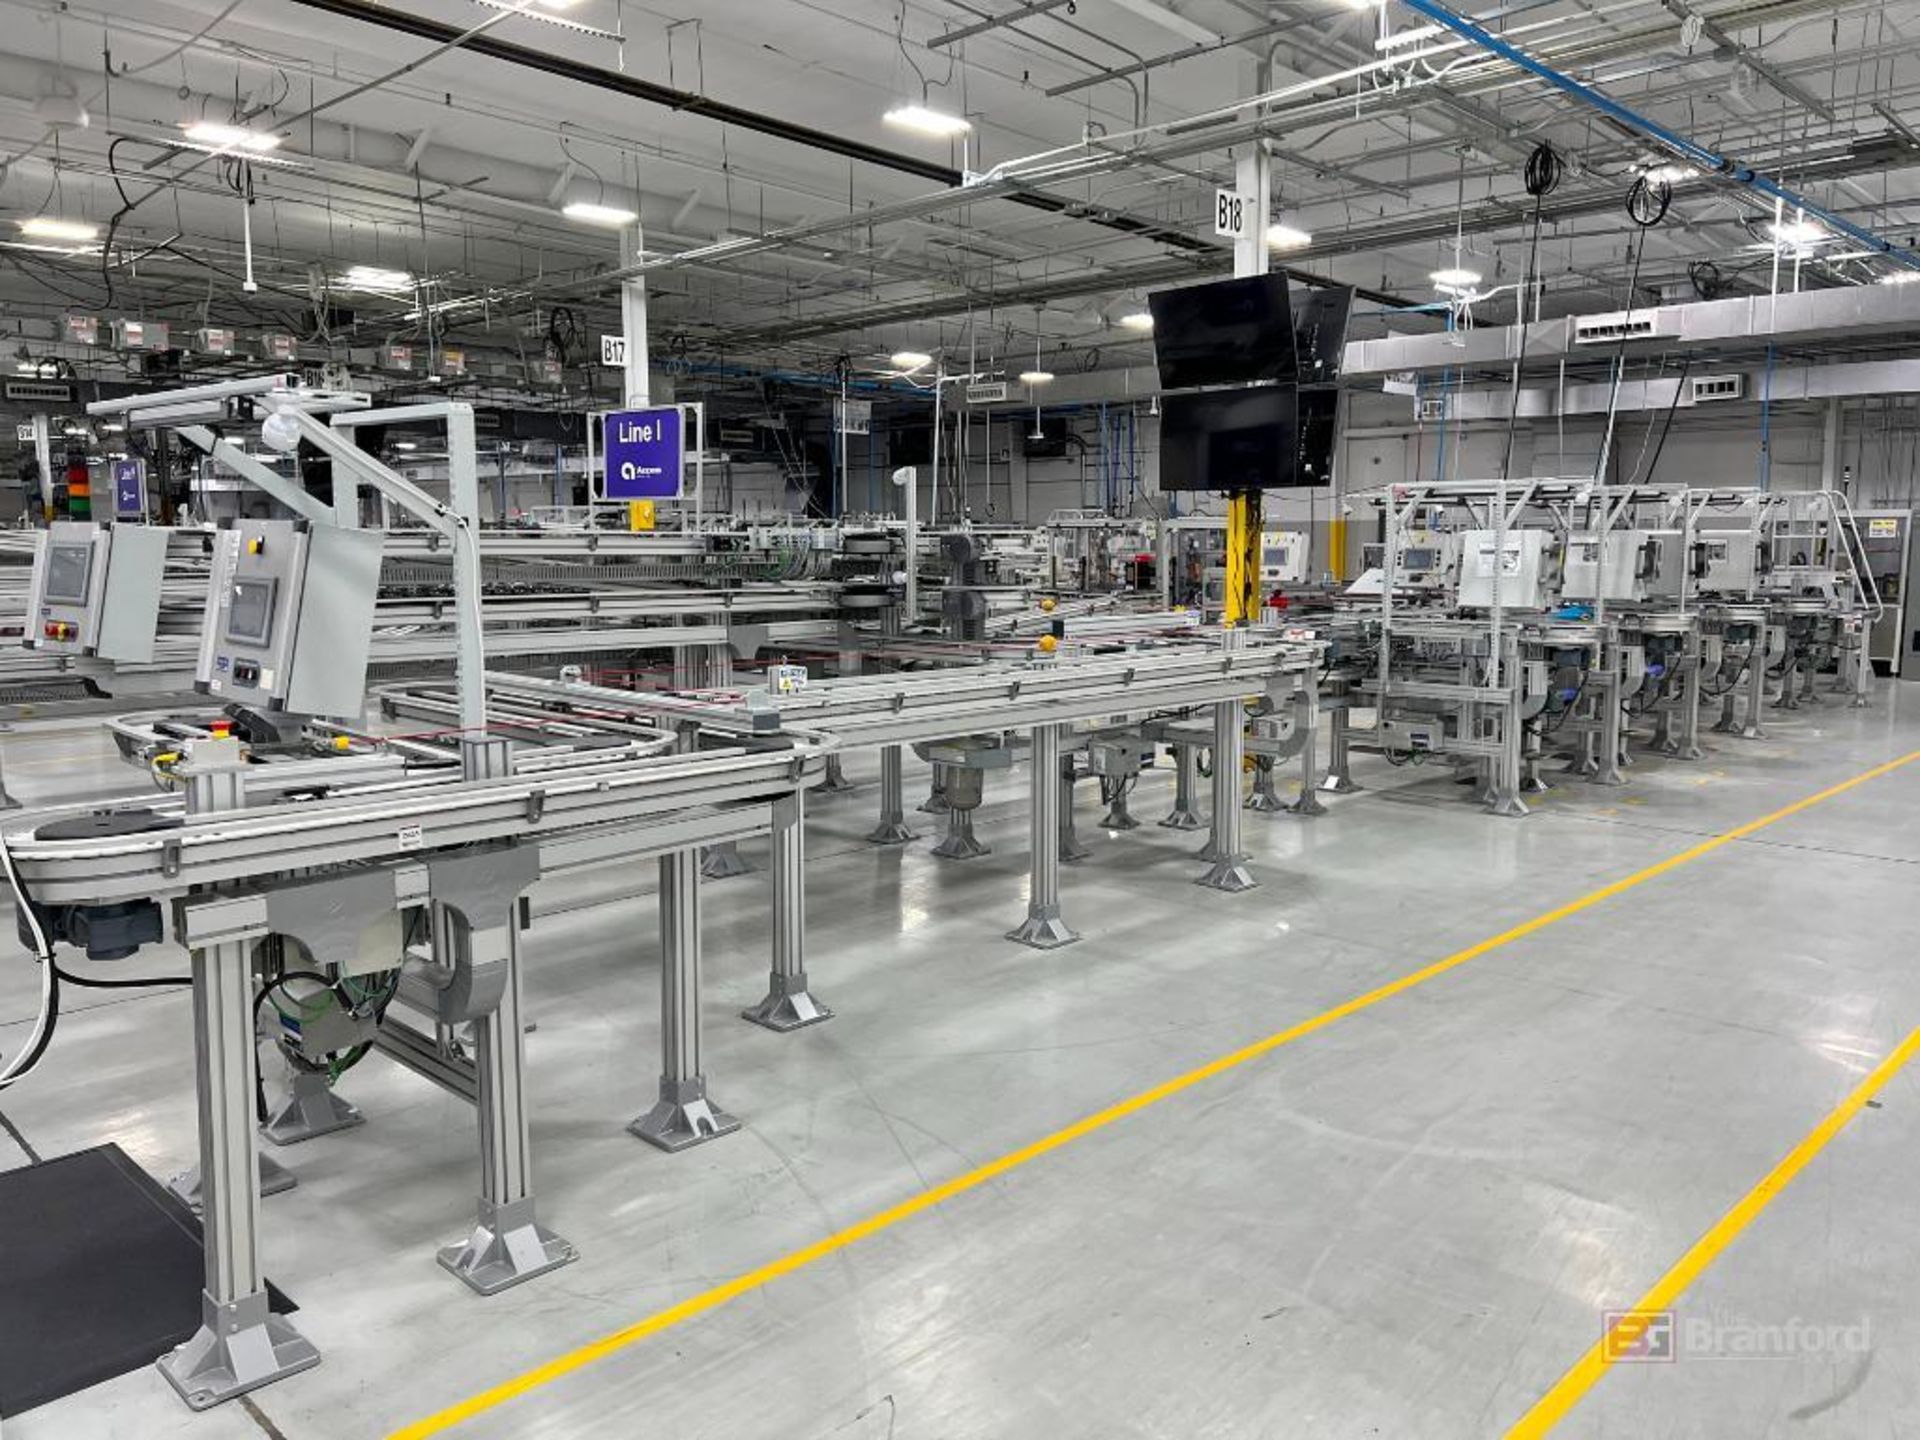 Flexlink Gen2 Multi-Layer Belt Conveyor System with DRO main control - Image 17 of 18